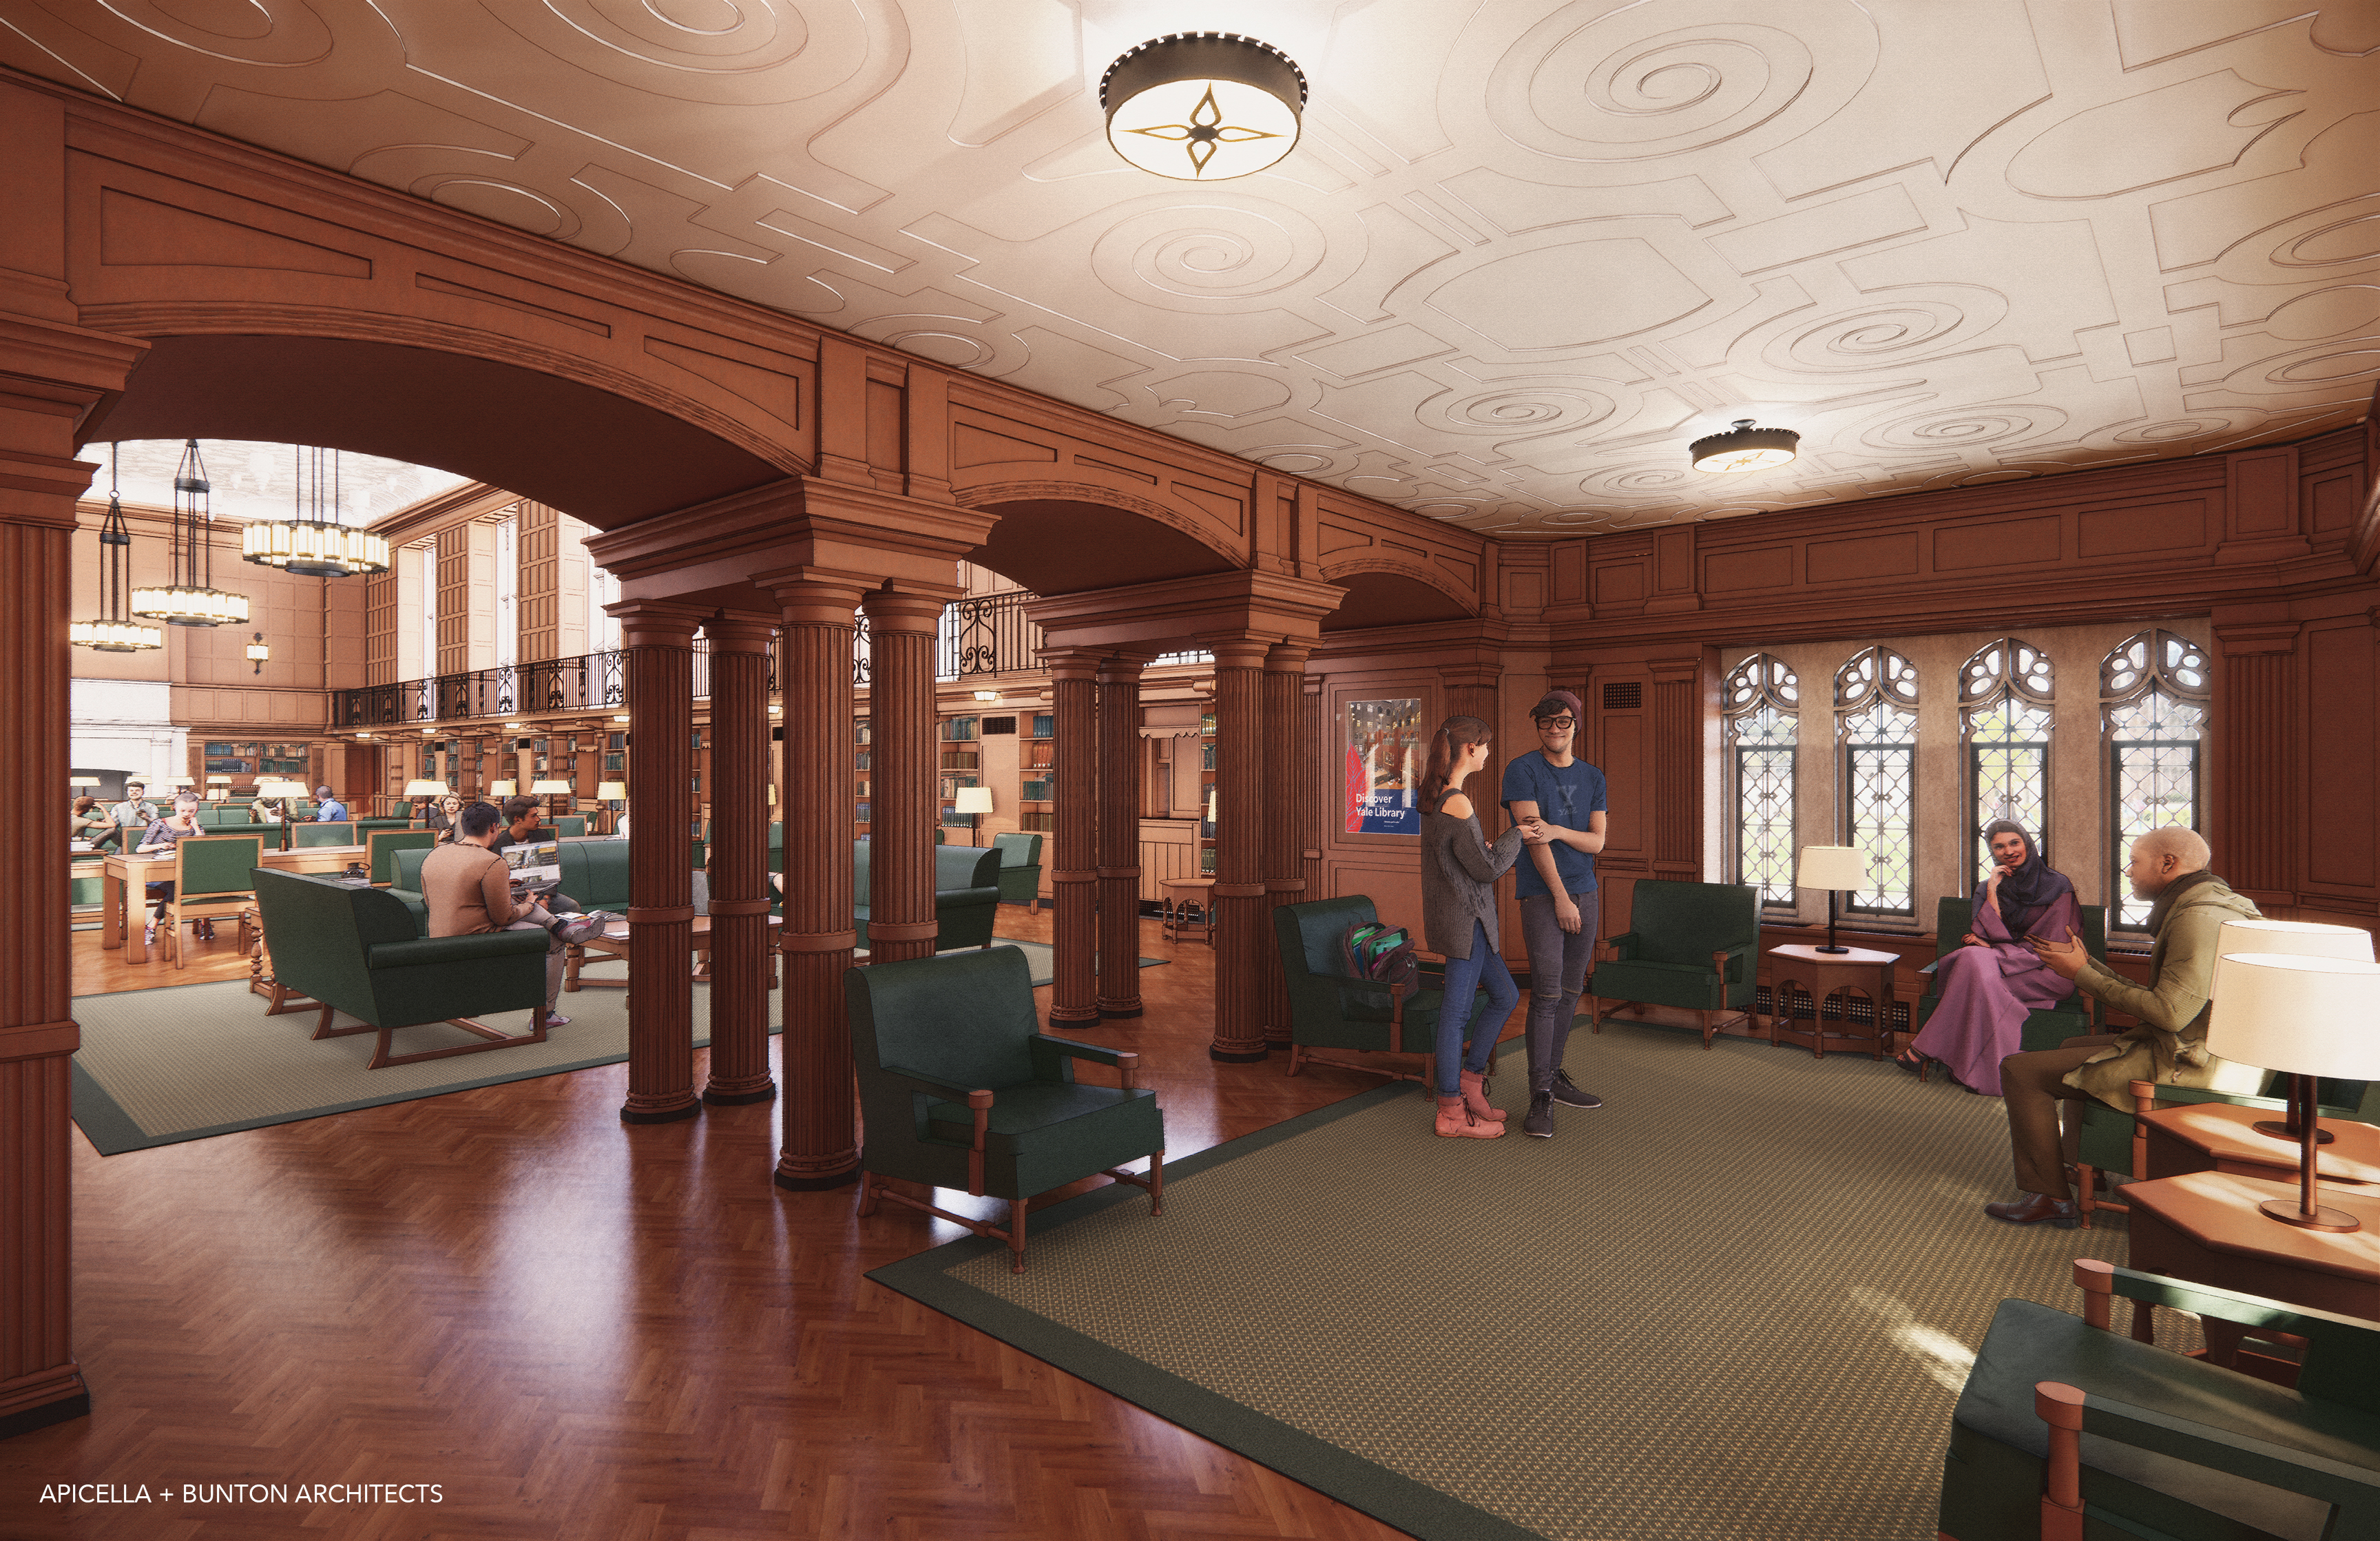 Rendering of renovated entry with windows and arched entrance and view into main reading room area through arches